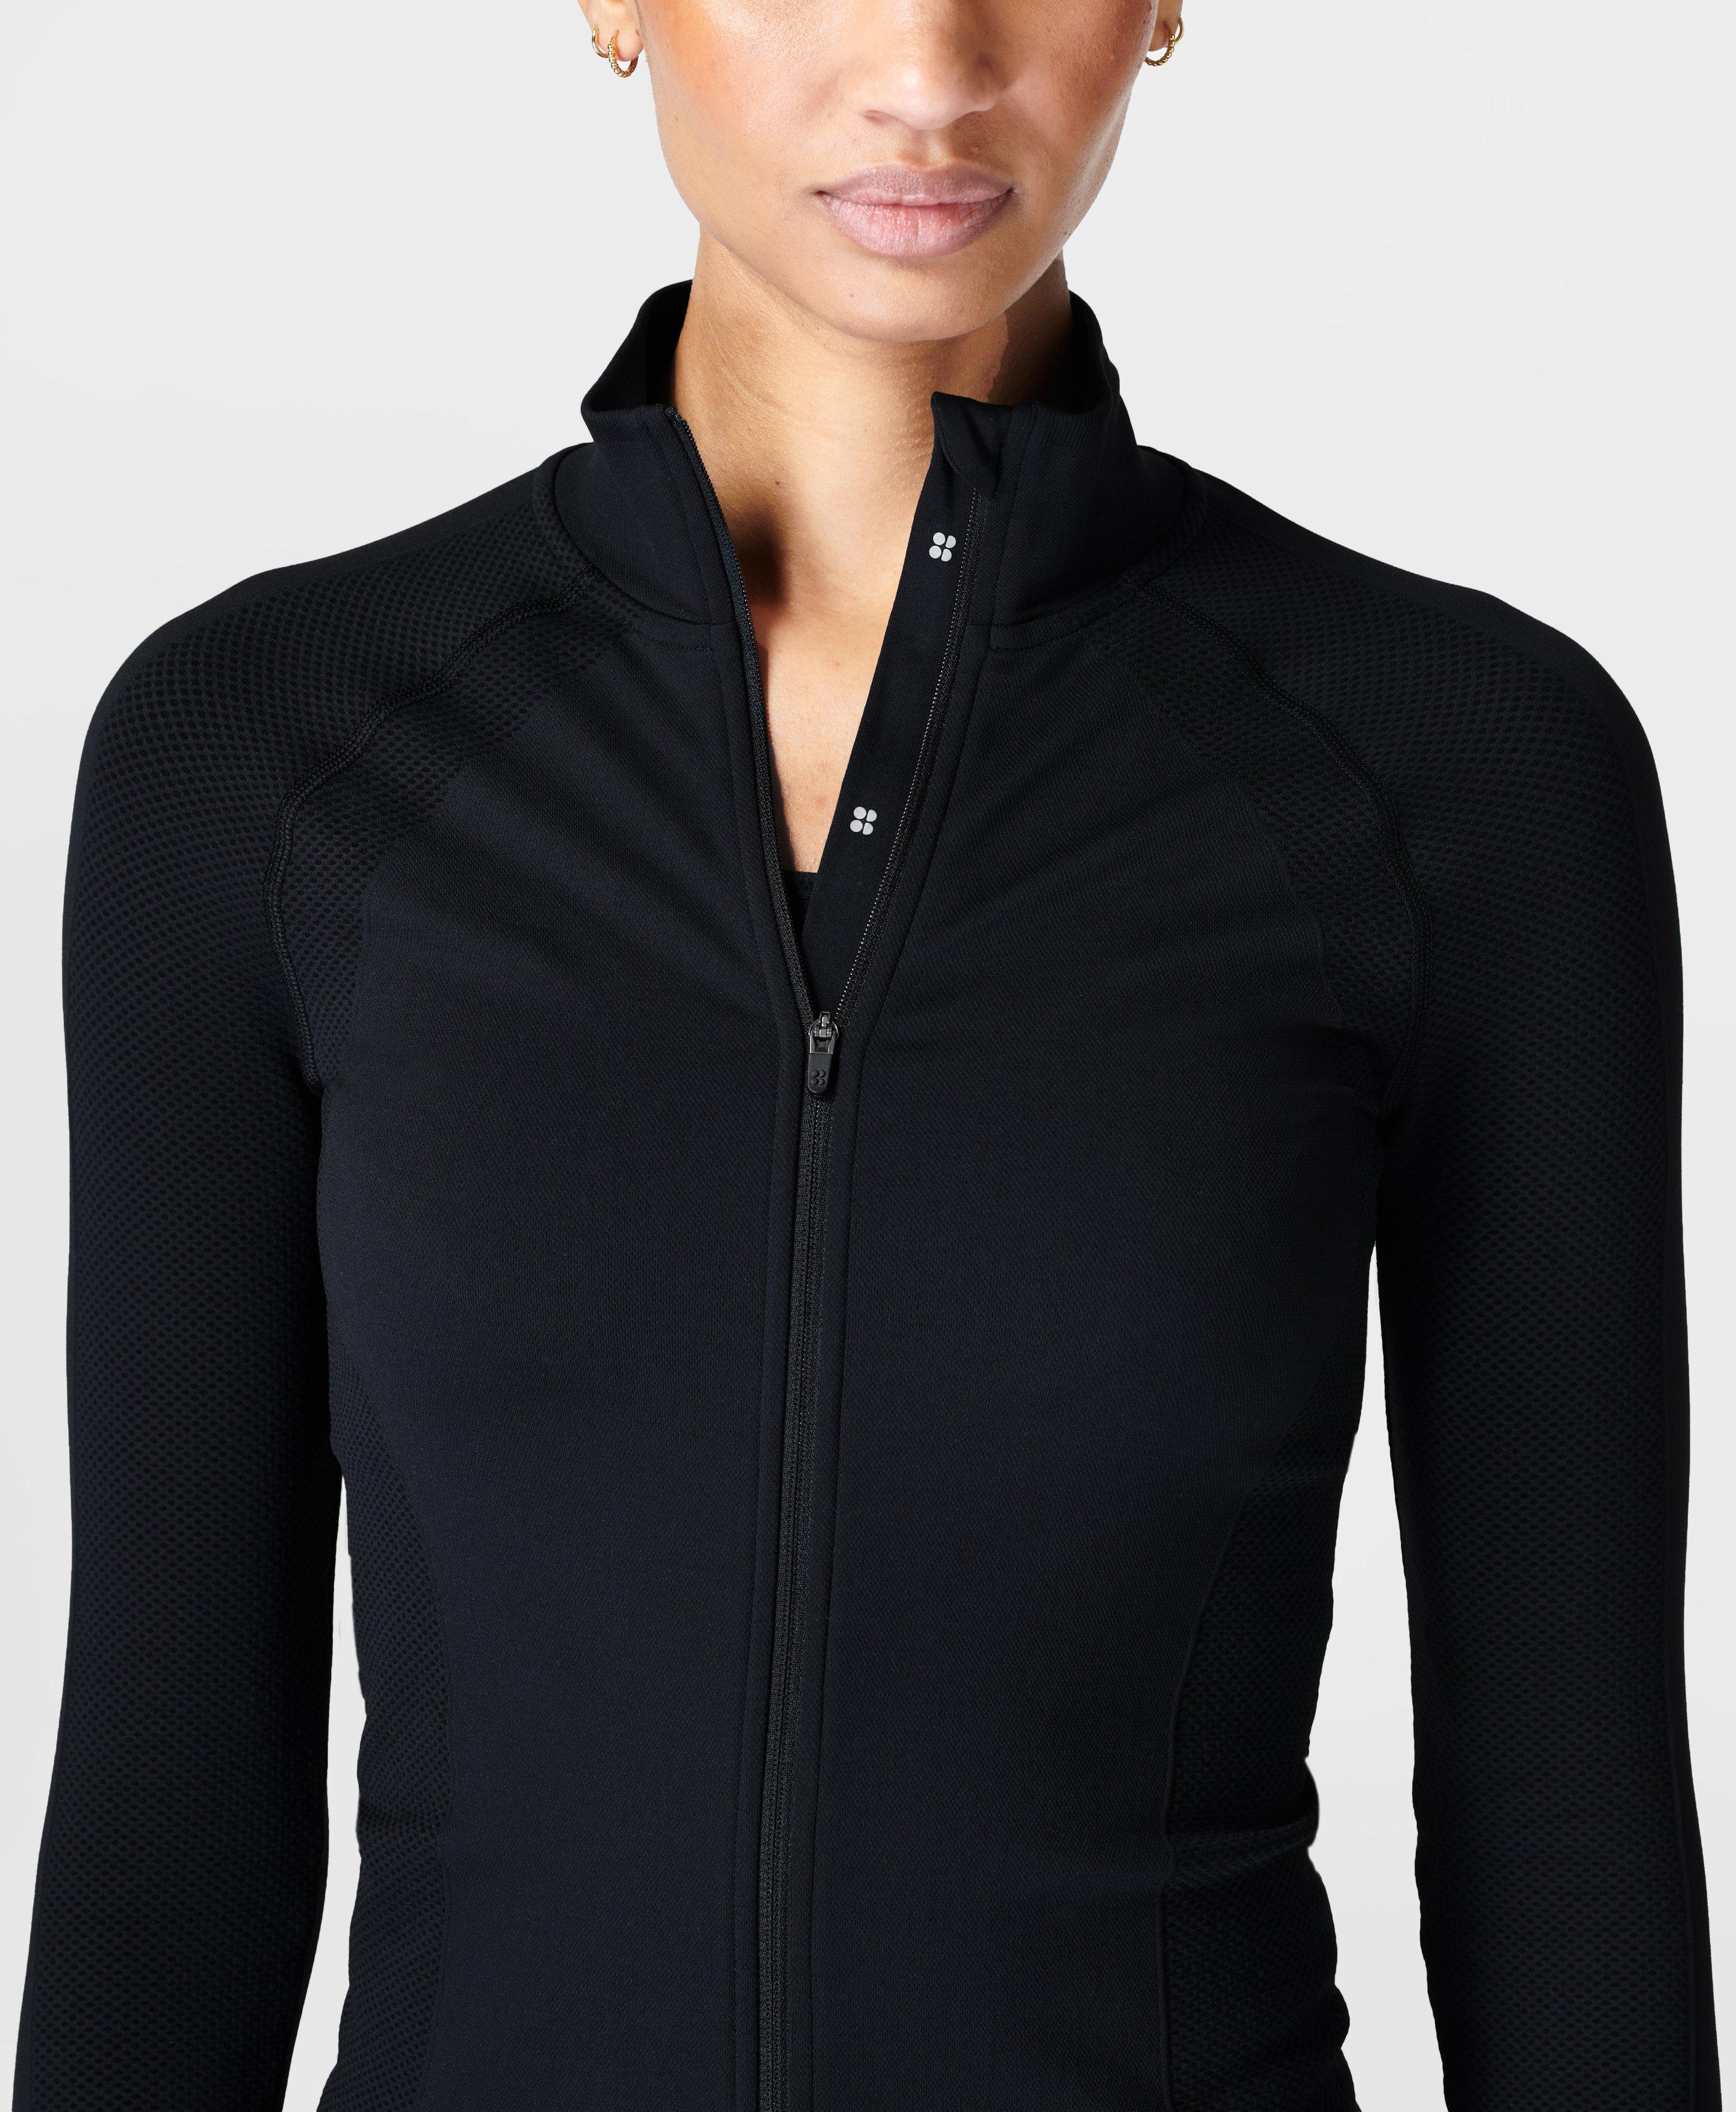 Athlete Doubleweight Seamless Workout Zip Up - Black